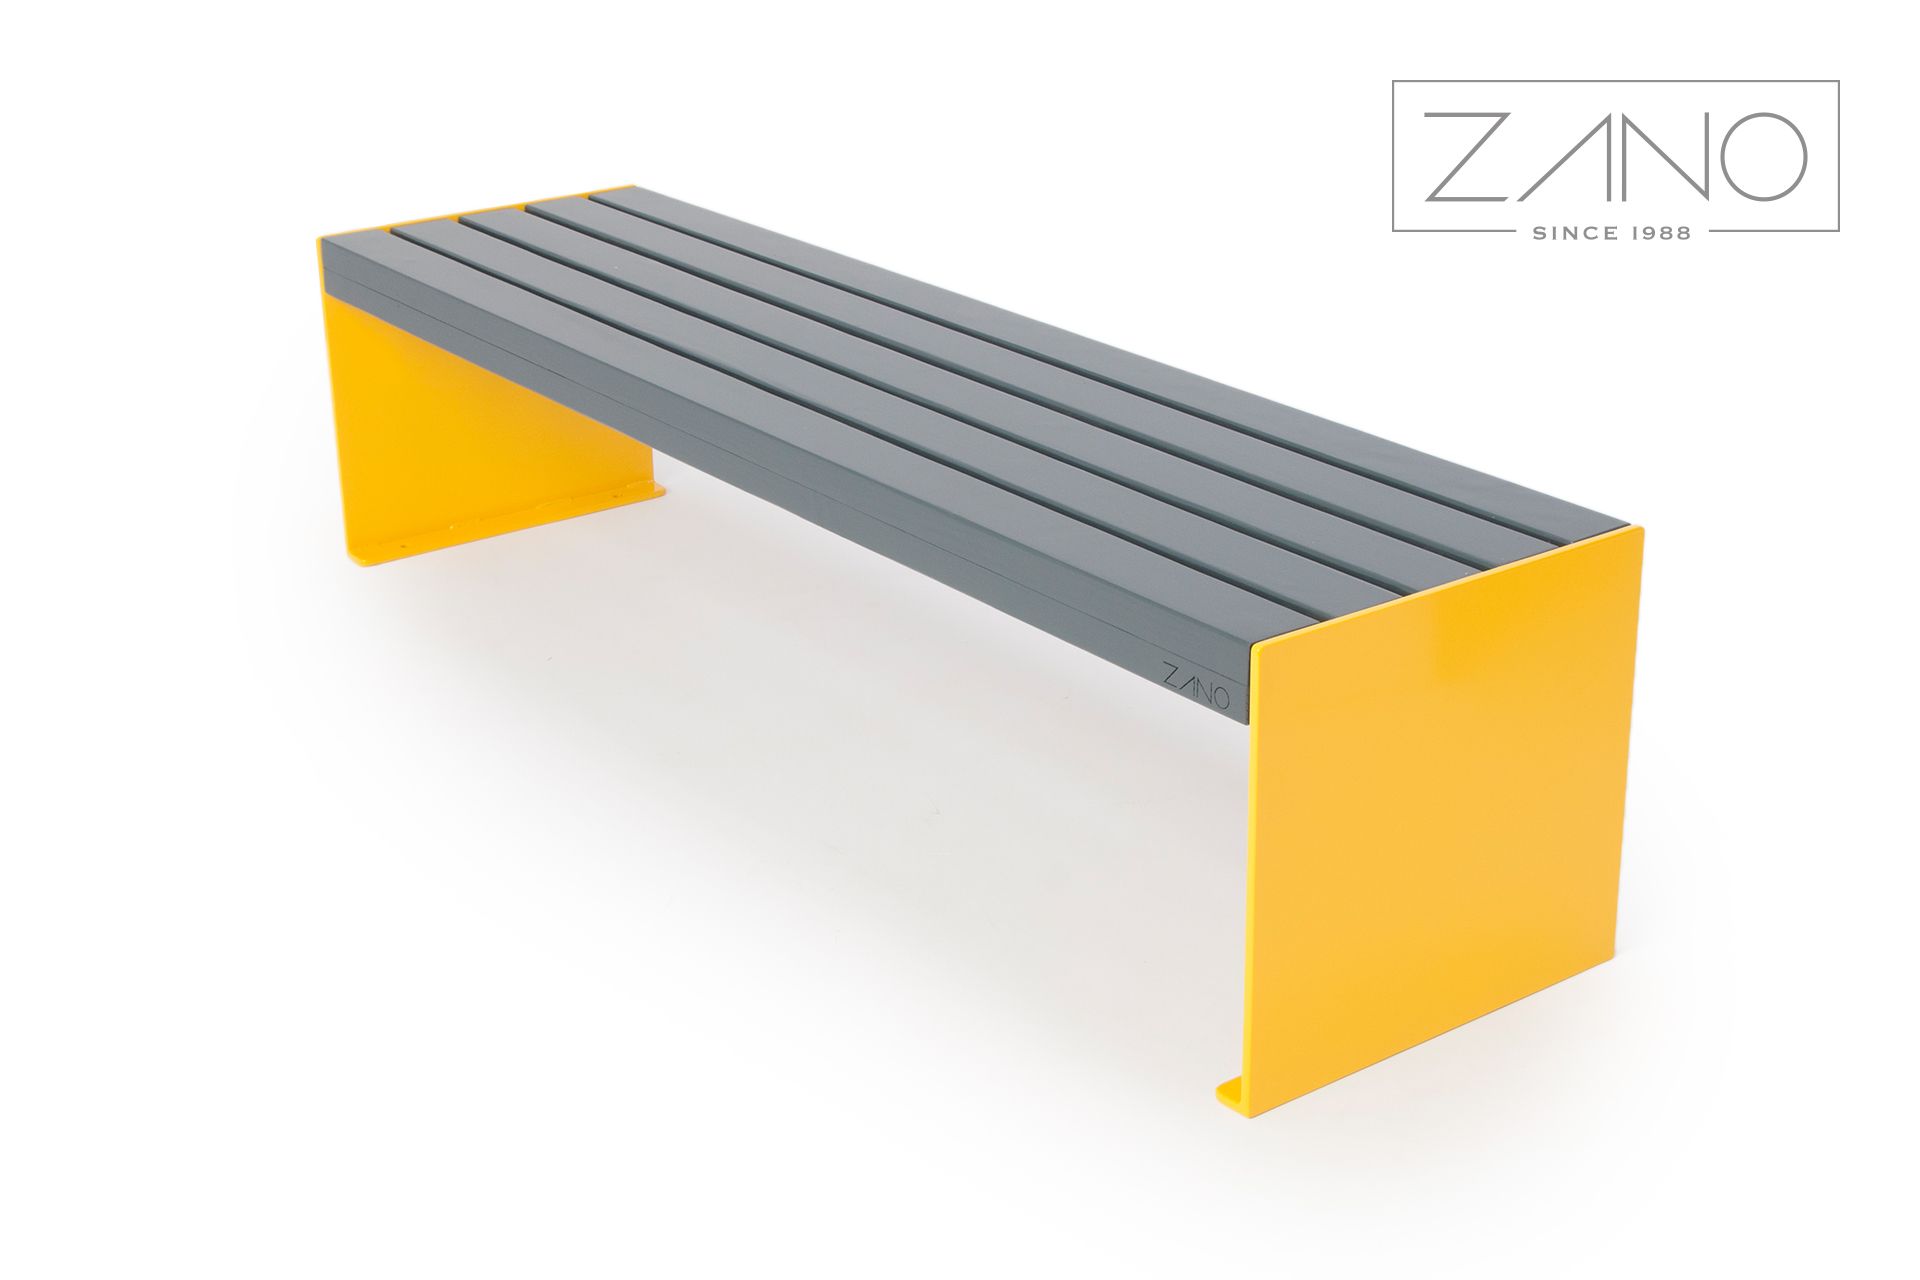 Street bench made of steel and wood painted yellow and gray